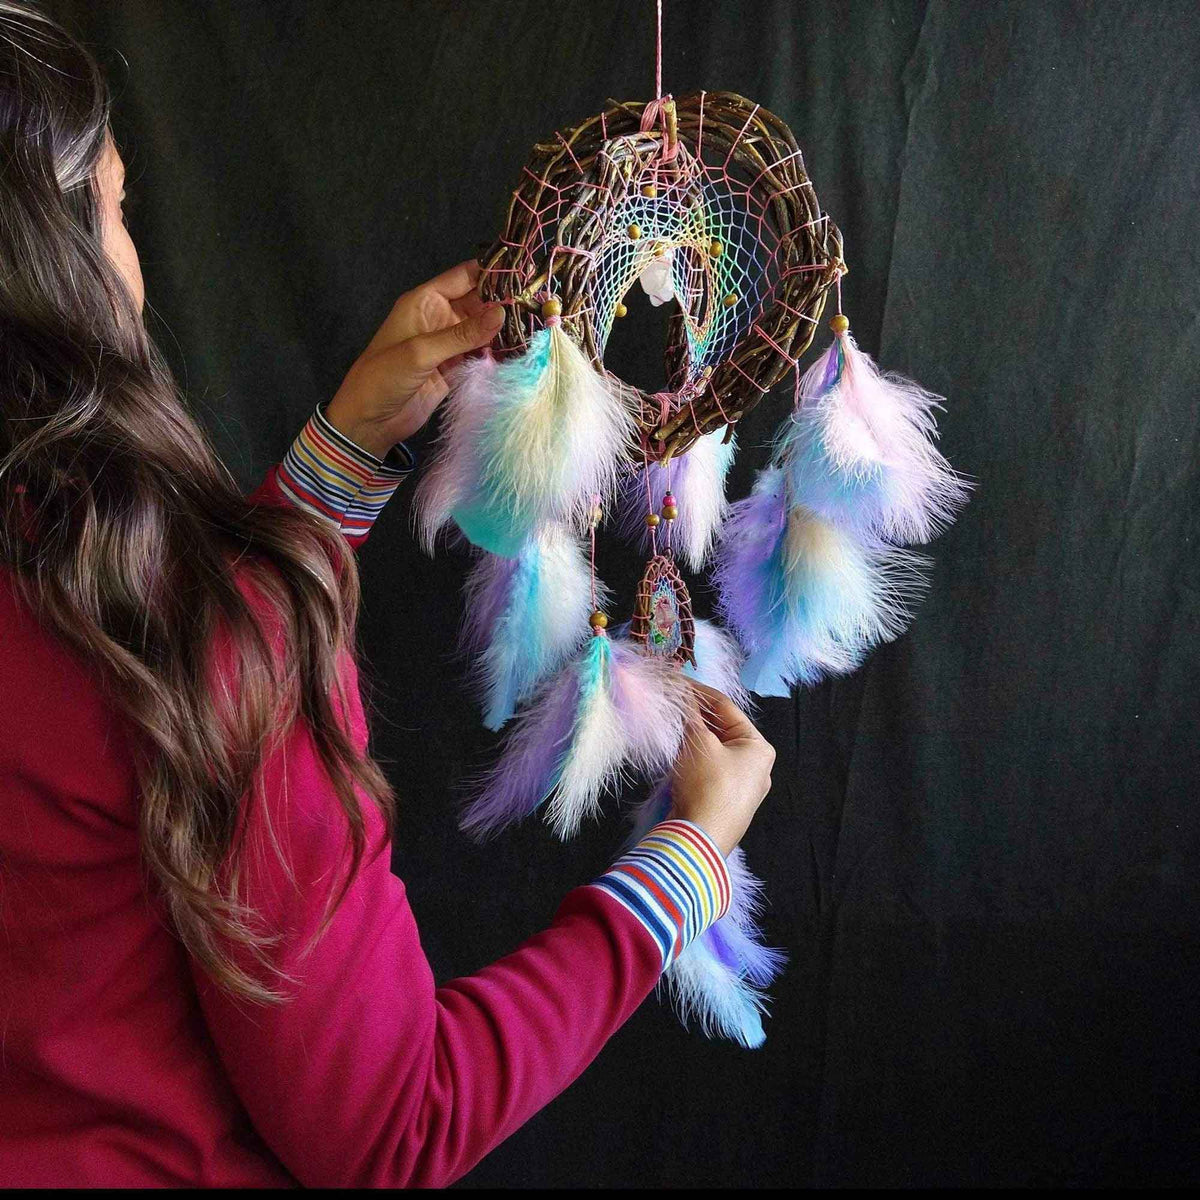 Real crystals hanging decor Dream catcher energy healing Insomnia relief Relaxing wall decor Cleansing and protection Stress gifts Manifest ArMoniZar